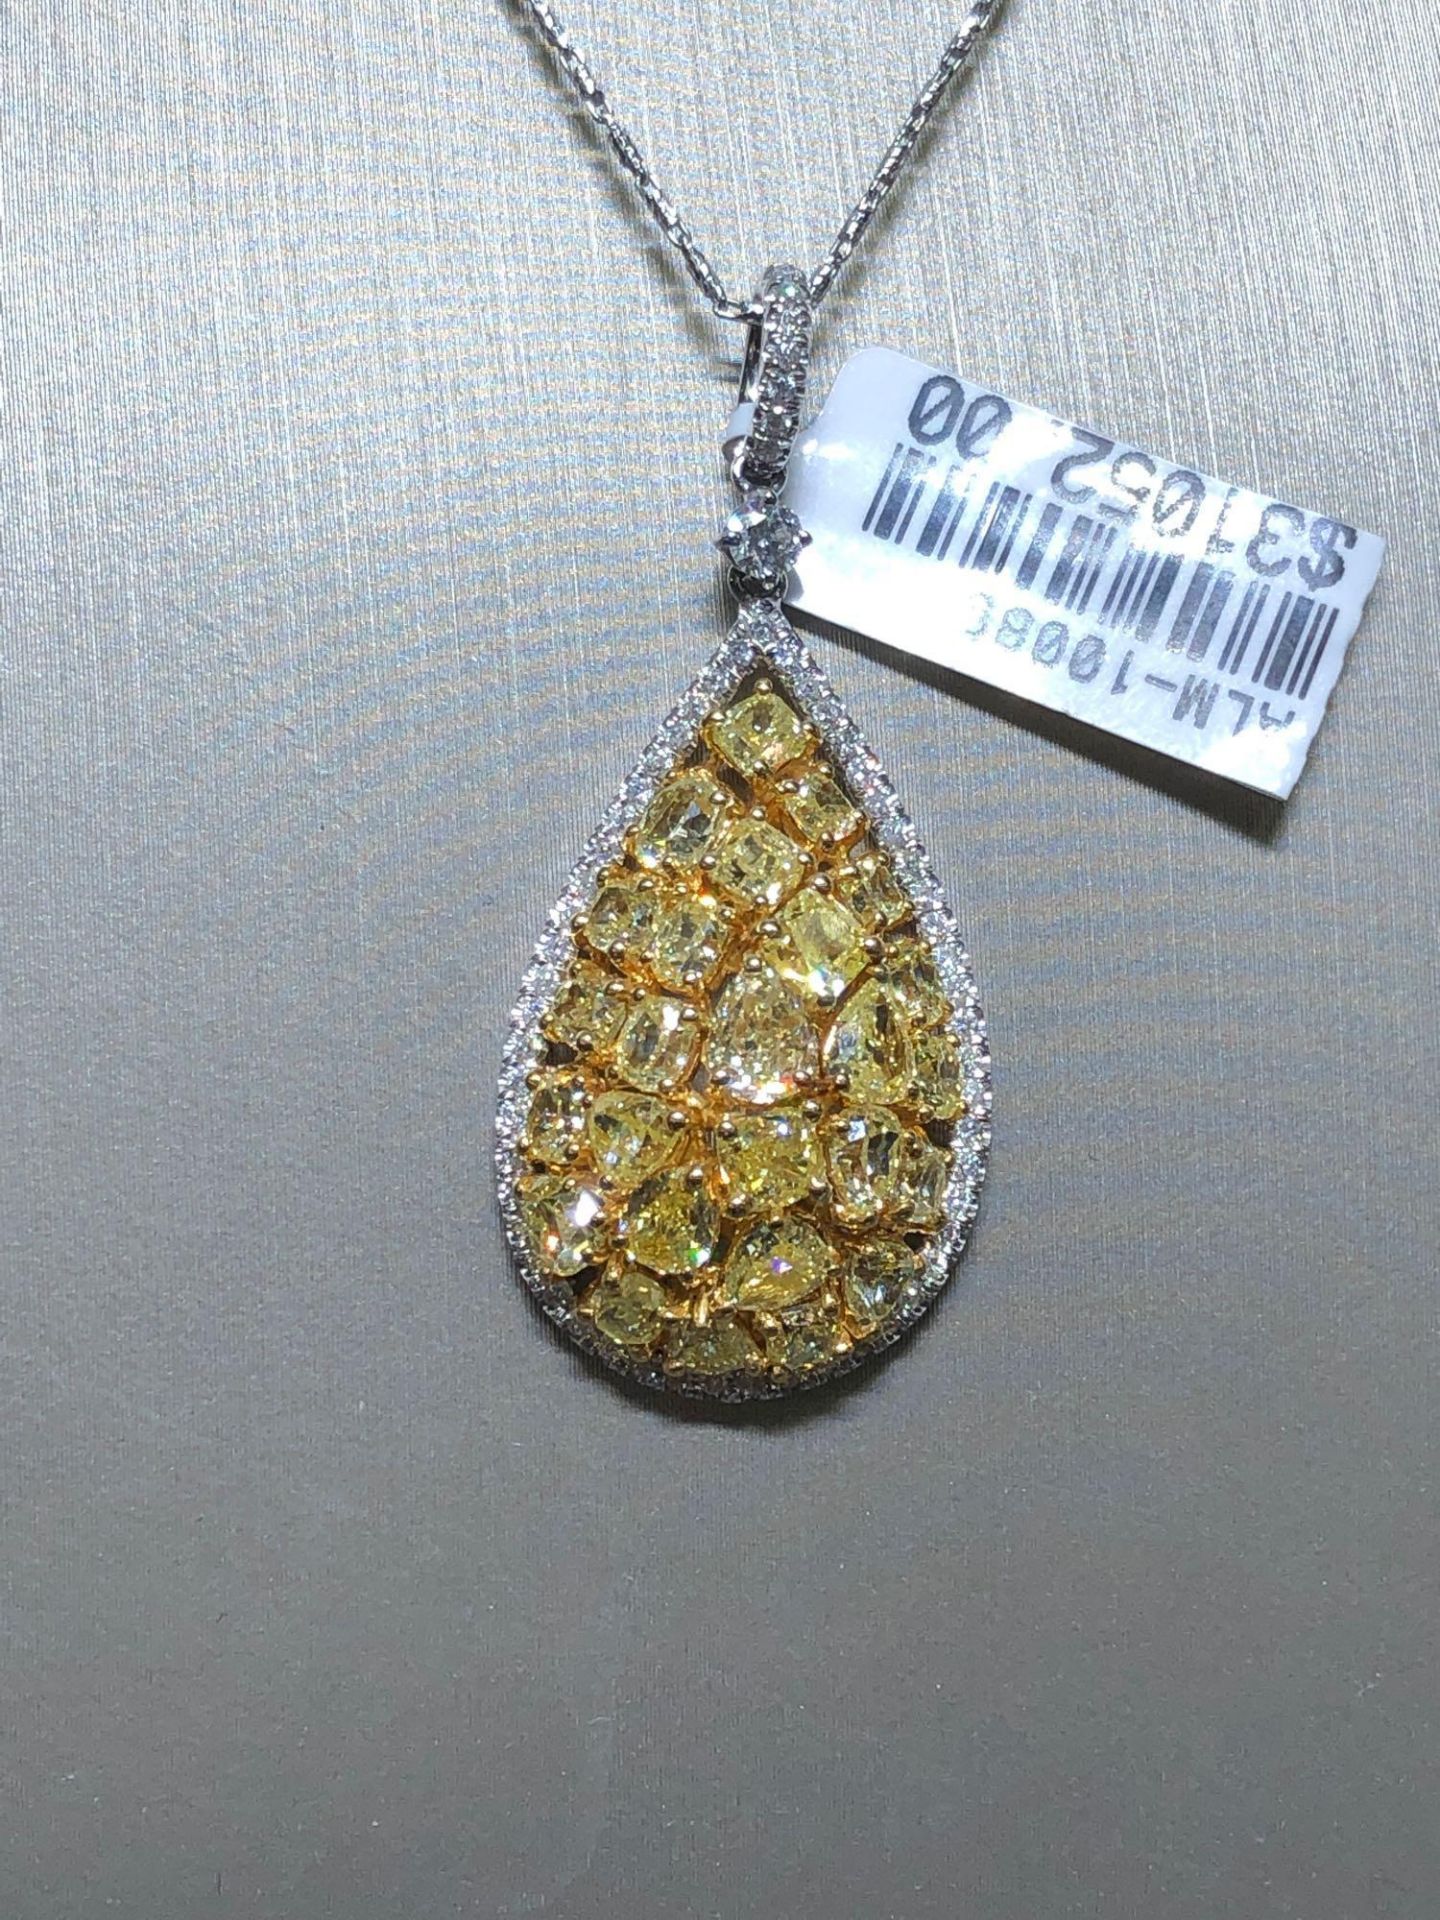 ONE OF A KIND YELLOW AND WHITE DIAMOND NECKLACE. 5.48CT FANCY YELLOW DIAMONDS AND .48CT WHITE DIAMON